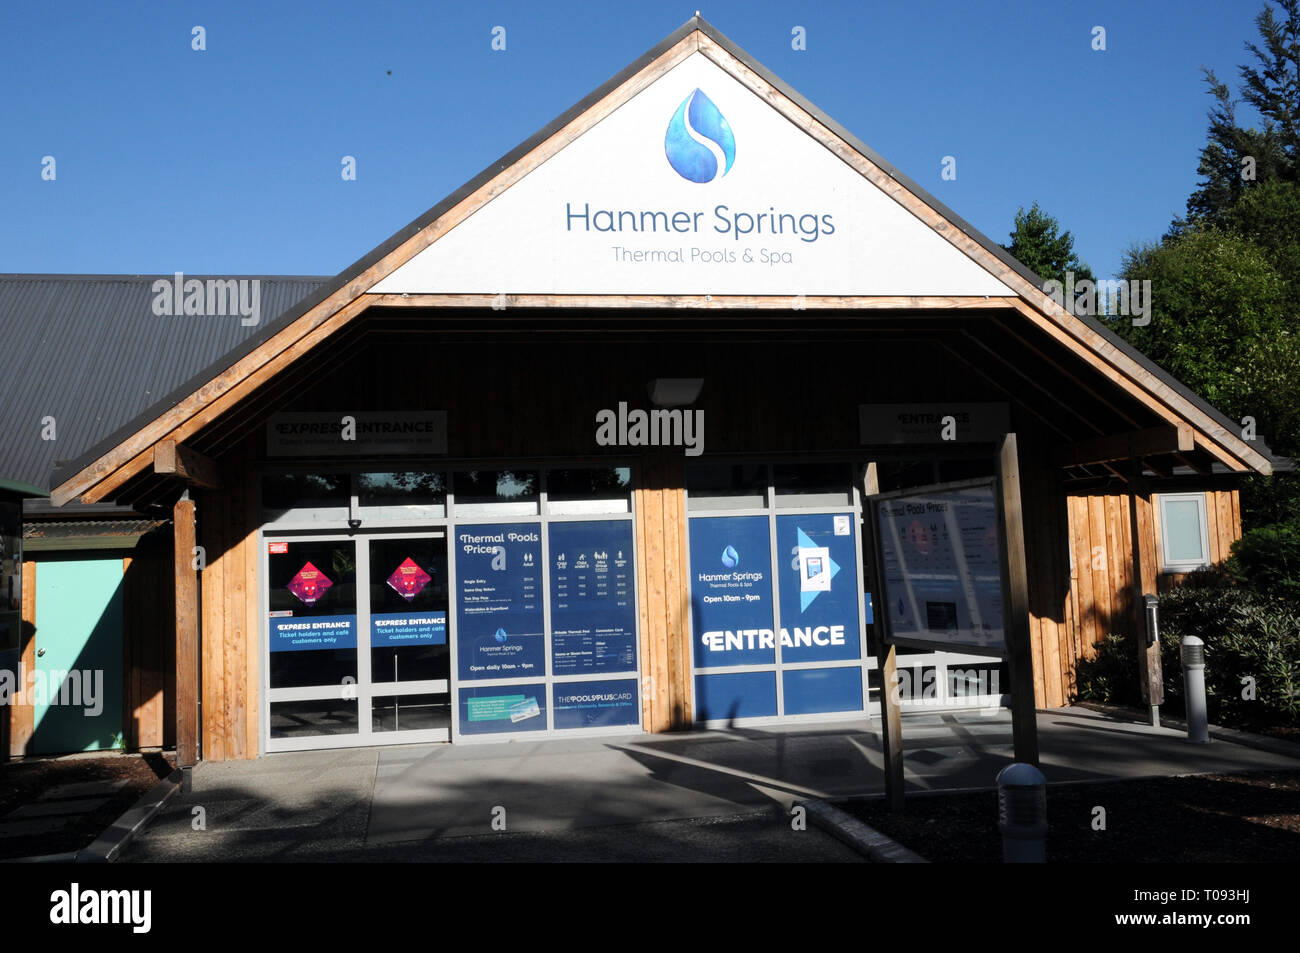 Entrance Hanmer Springs thermal pools and spa. Hanmer Springs is a resort town in the Canterbury region of New Zealands South Island. Stock Photo